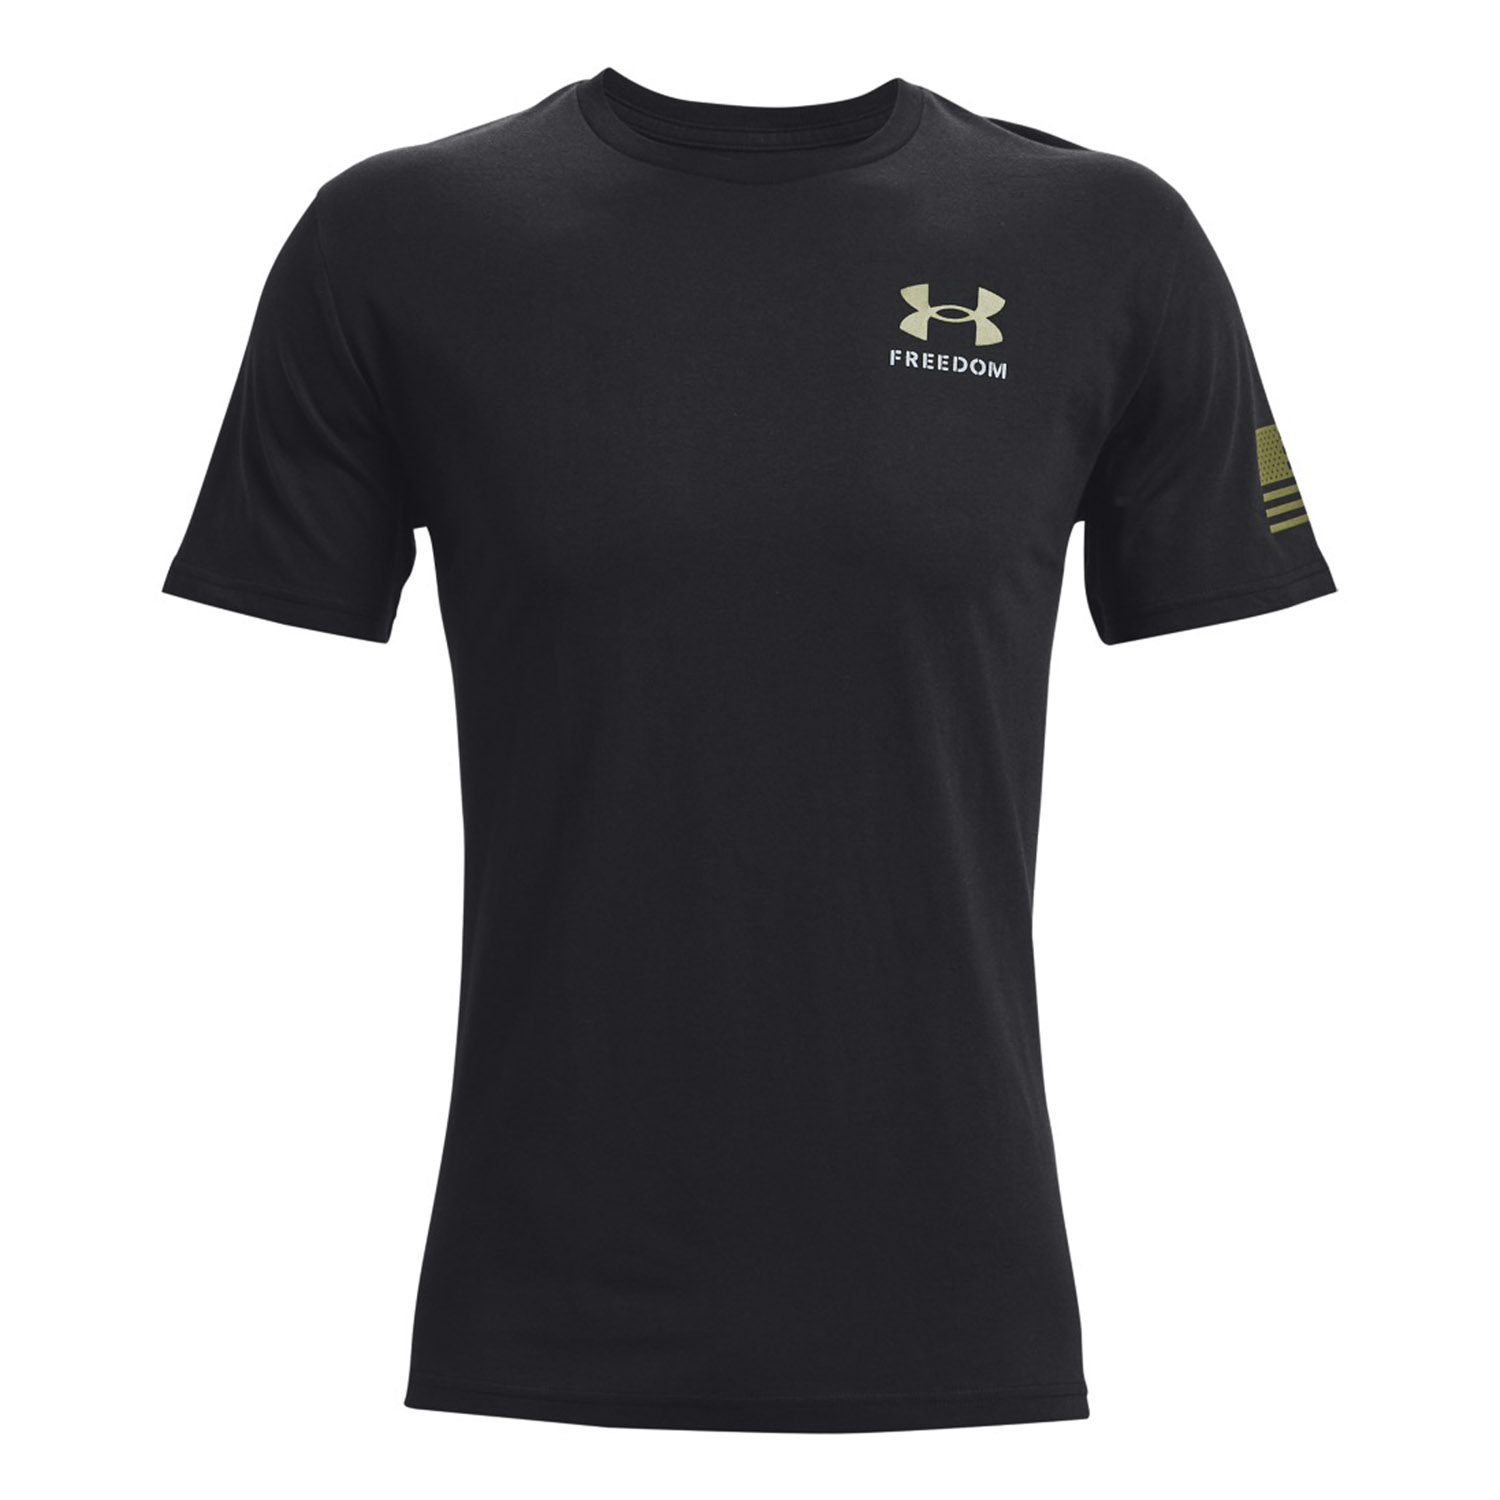 UNDER ARMOUR FREEDOM BANNER GRAPHIC TEE